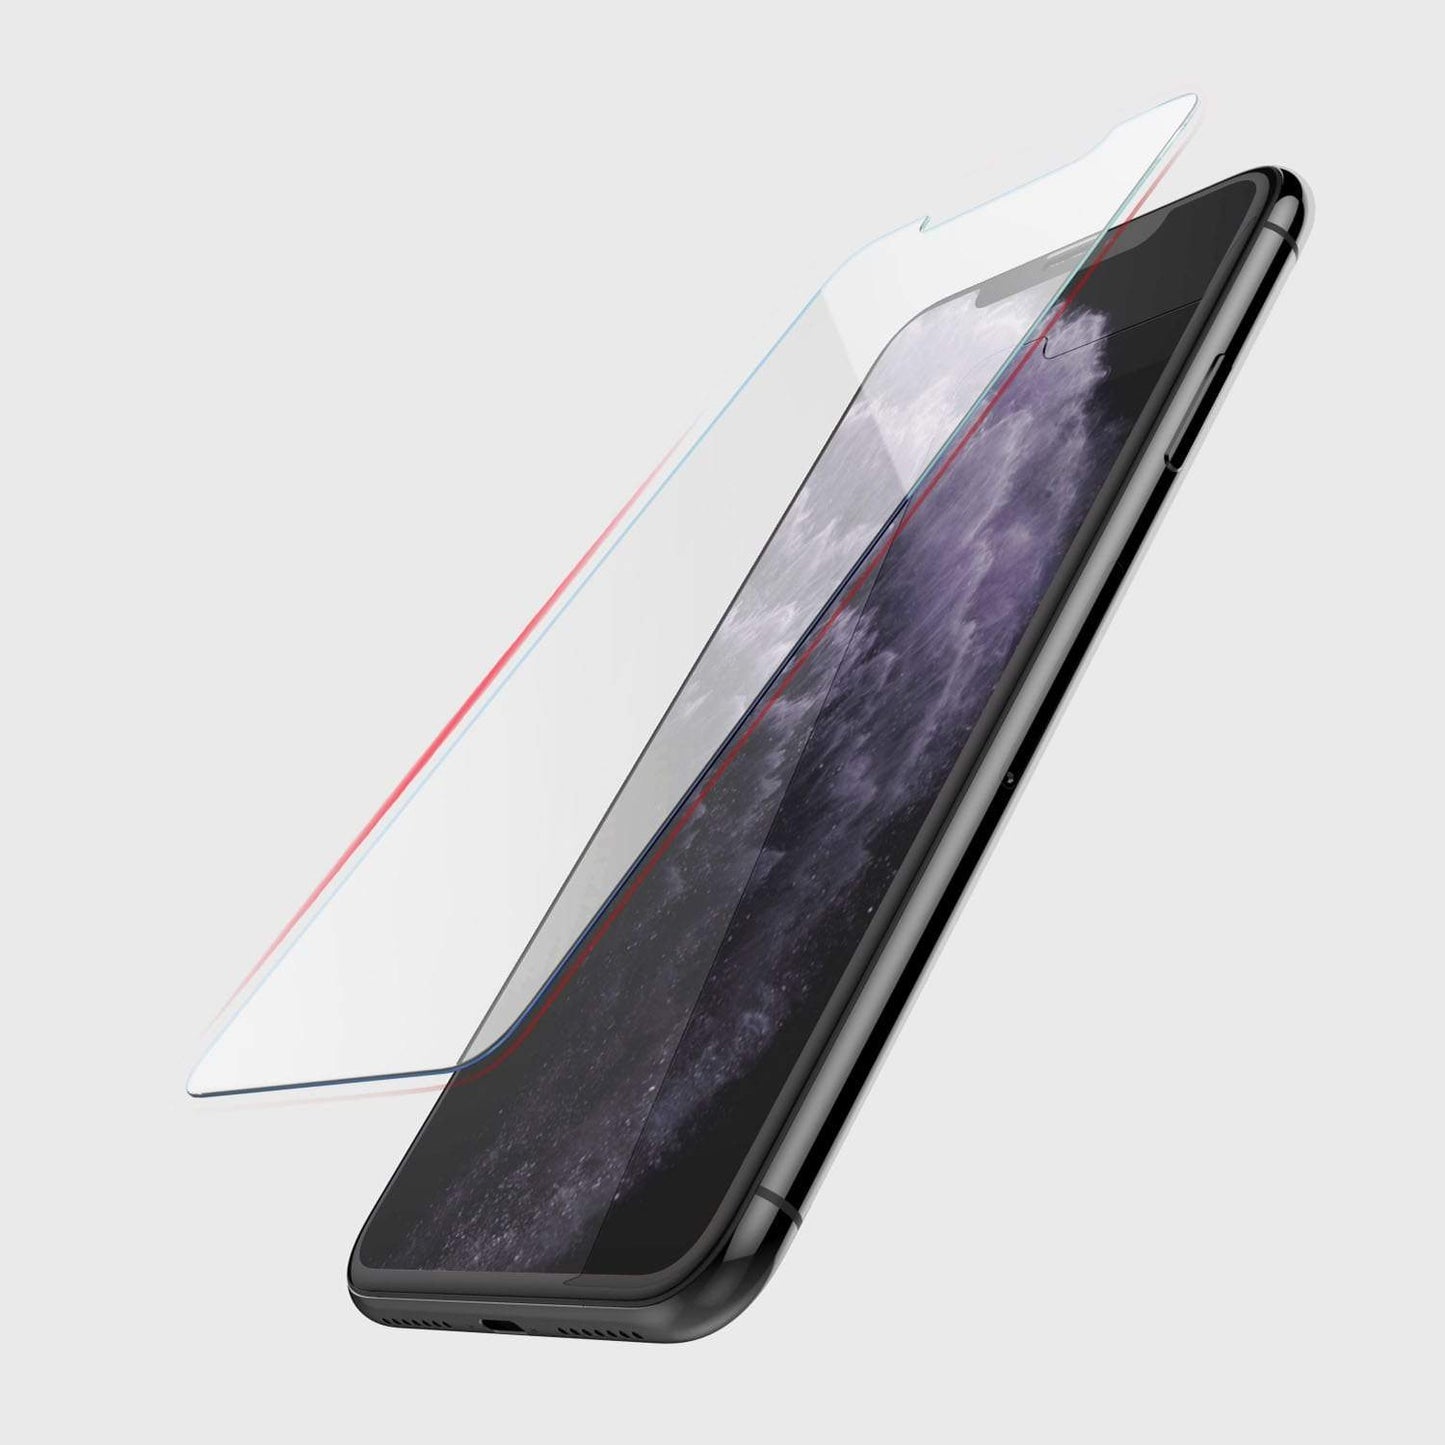 Defense Glass edge to edge is hovering over a black iphone 11 pro max